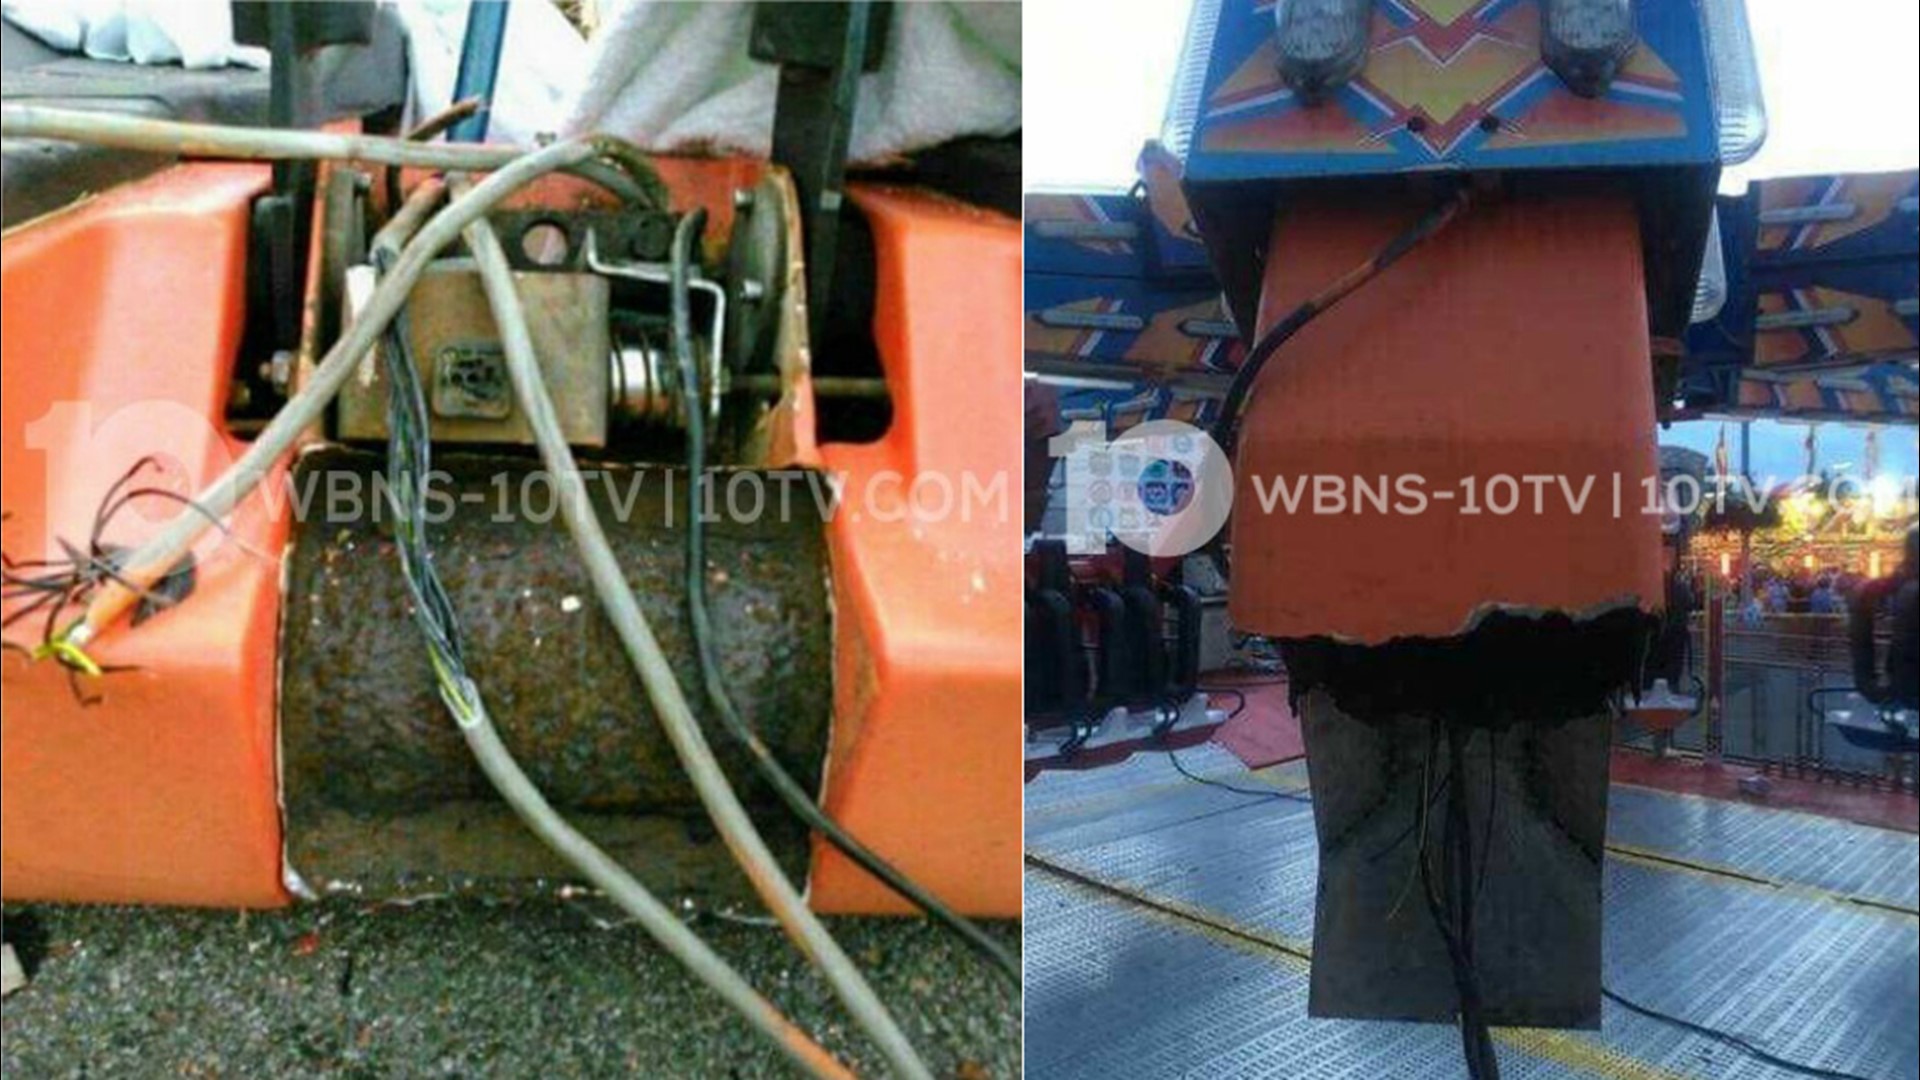 New photos show detached gondola, severed ride arm in aftermath of